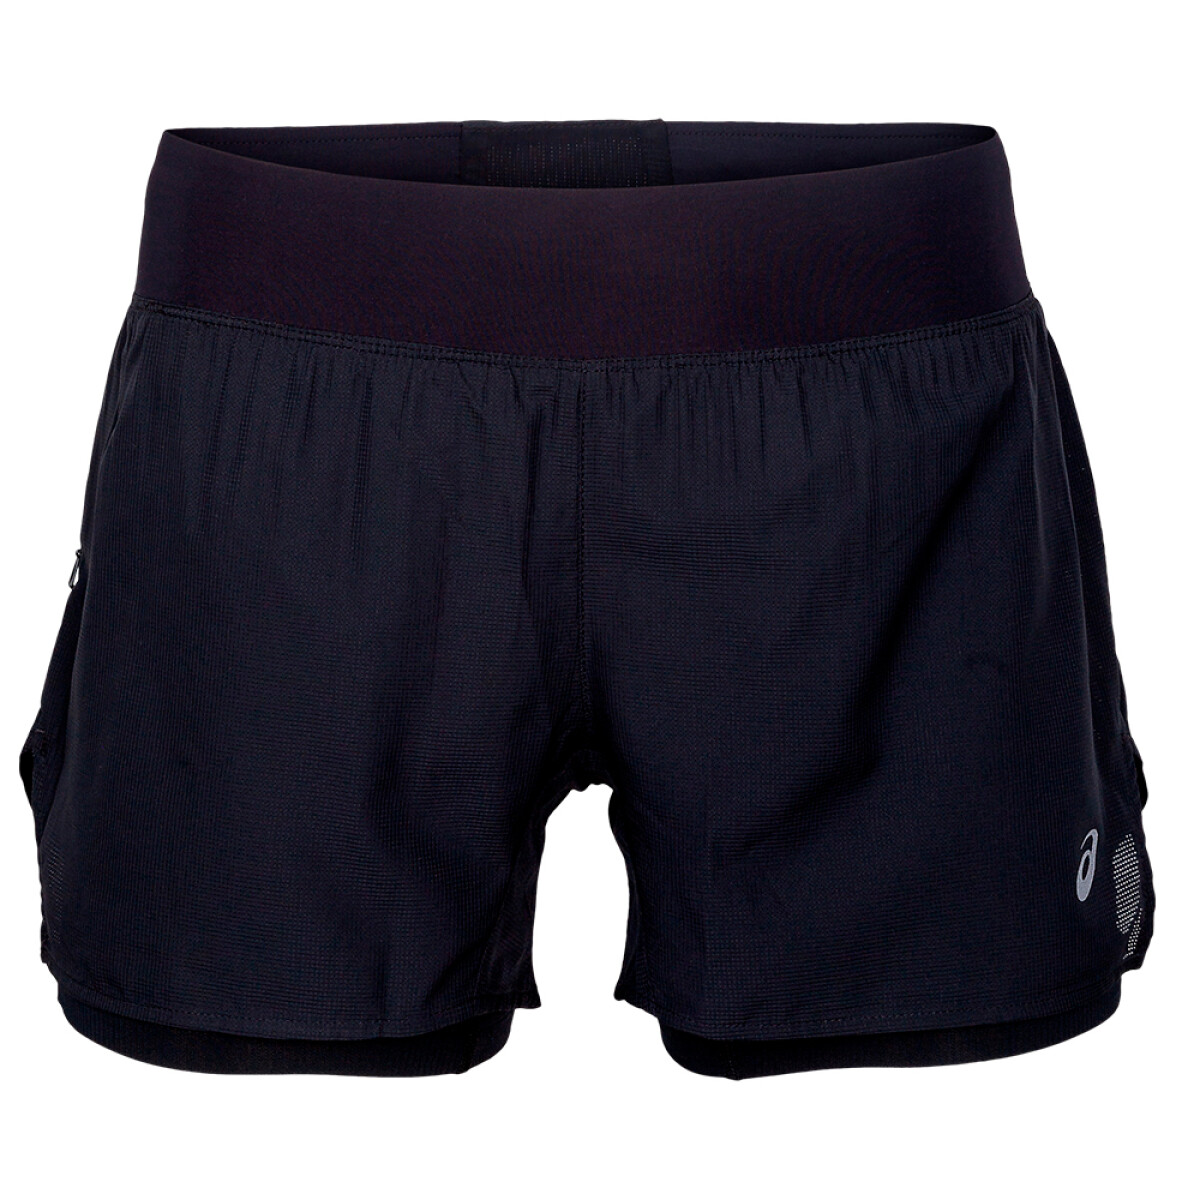 W PROTECTION COOL 2IN1 SHORT - Black 